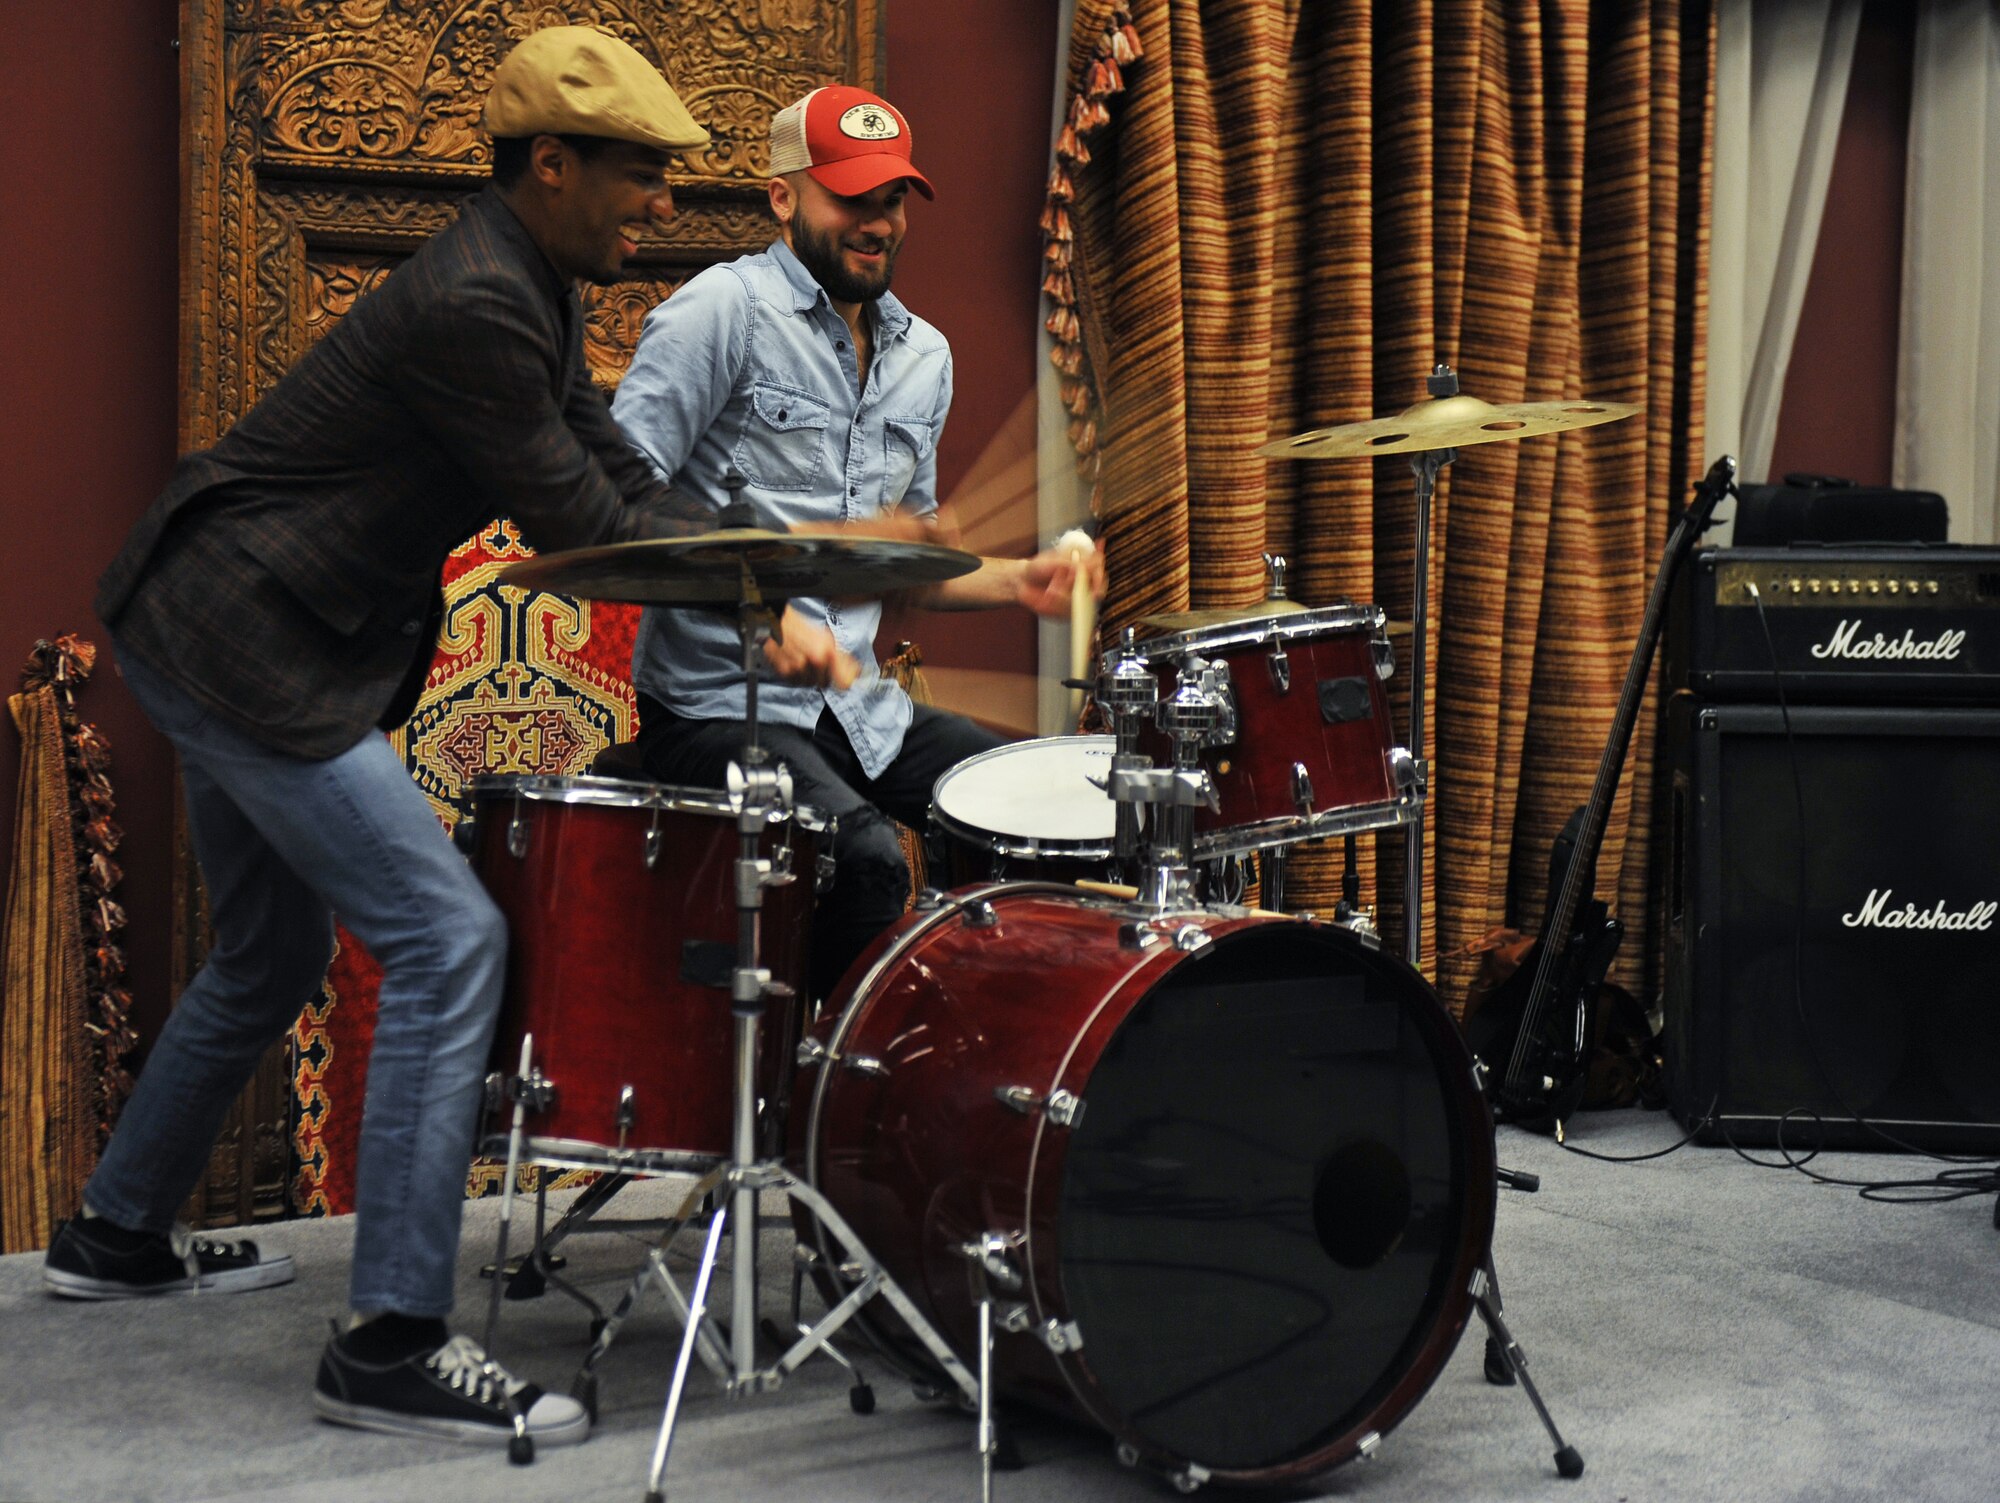 Jonathan Batiste plays the drums with Joe Saylor, drummer,  during the Stay Human Band performance  for service members at the 379th Air Expeditionary Wing, Southwest Asia, on Dec. 8, 2013. The band played modern jazz at the Kasbah which is one of the entertainment venues here. (U.S. Air Force photo/Master Sgt. David Miller)